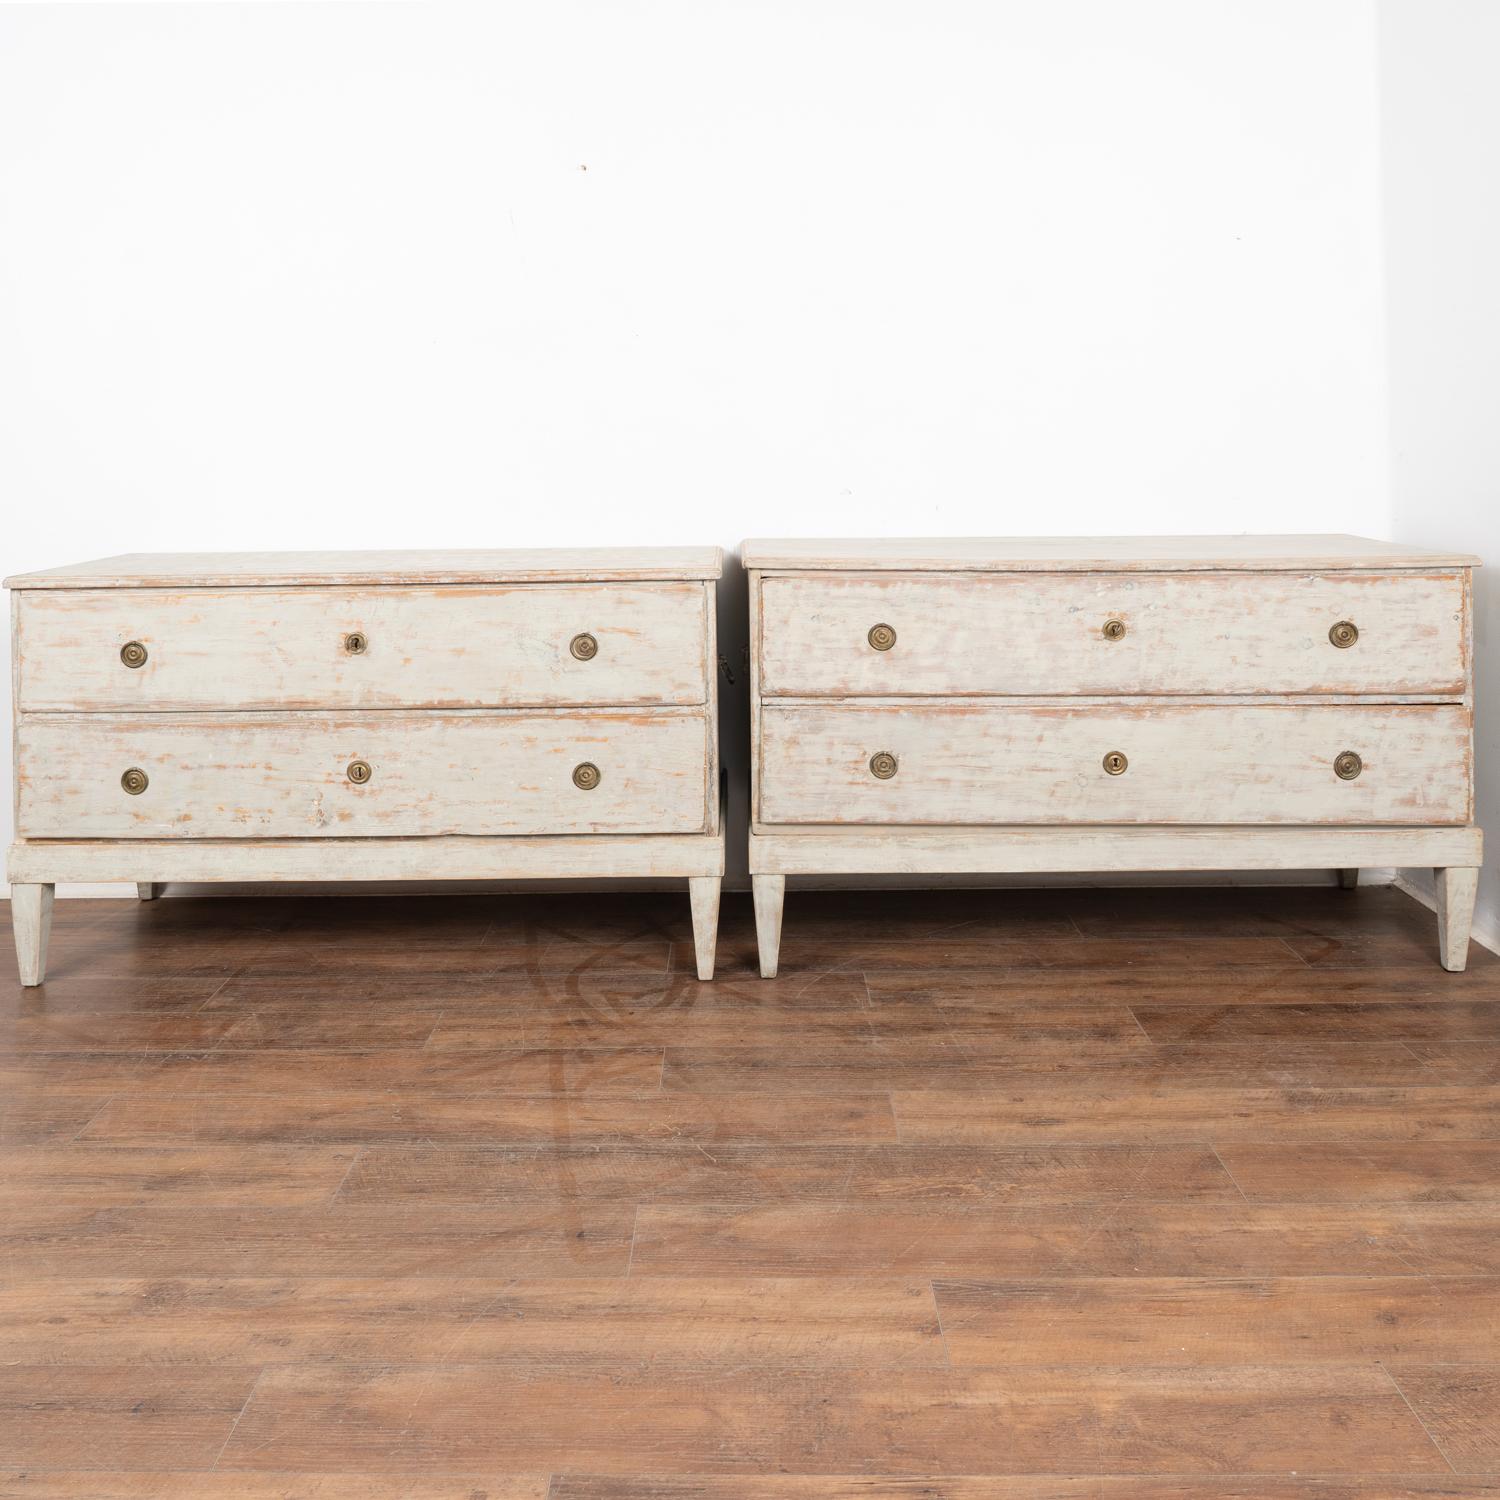 Pair, Long Gray Painted Pine Chests of Two Drawers, Sweden circa 1800-40 For Sale 1